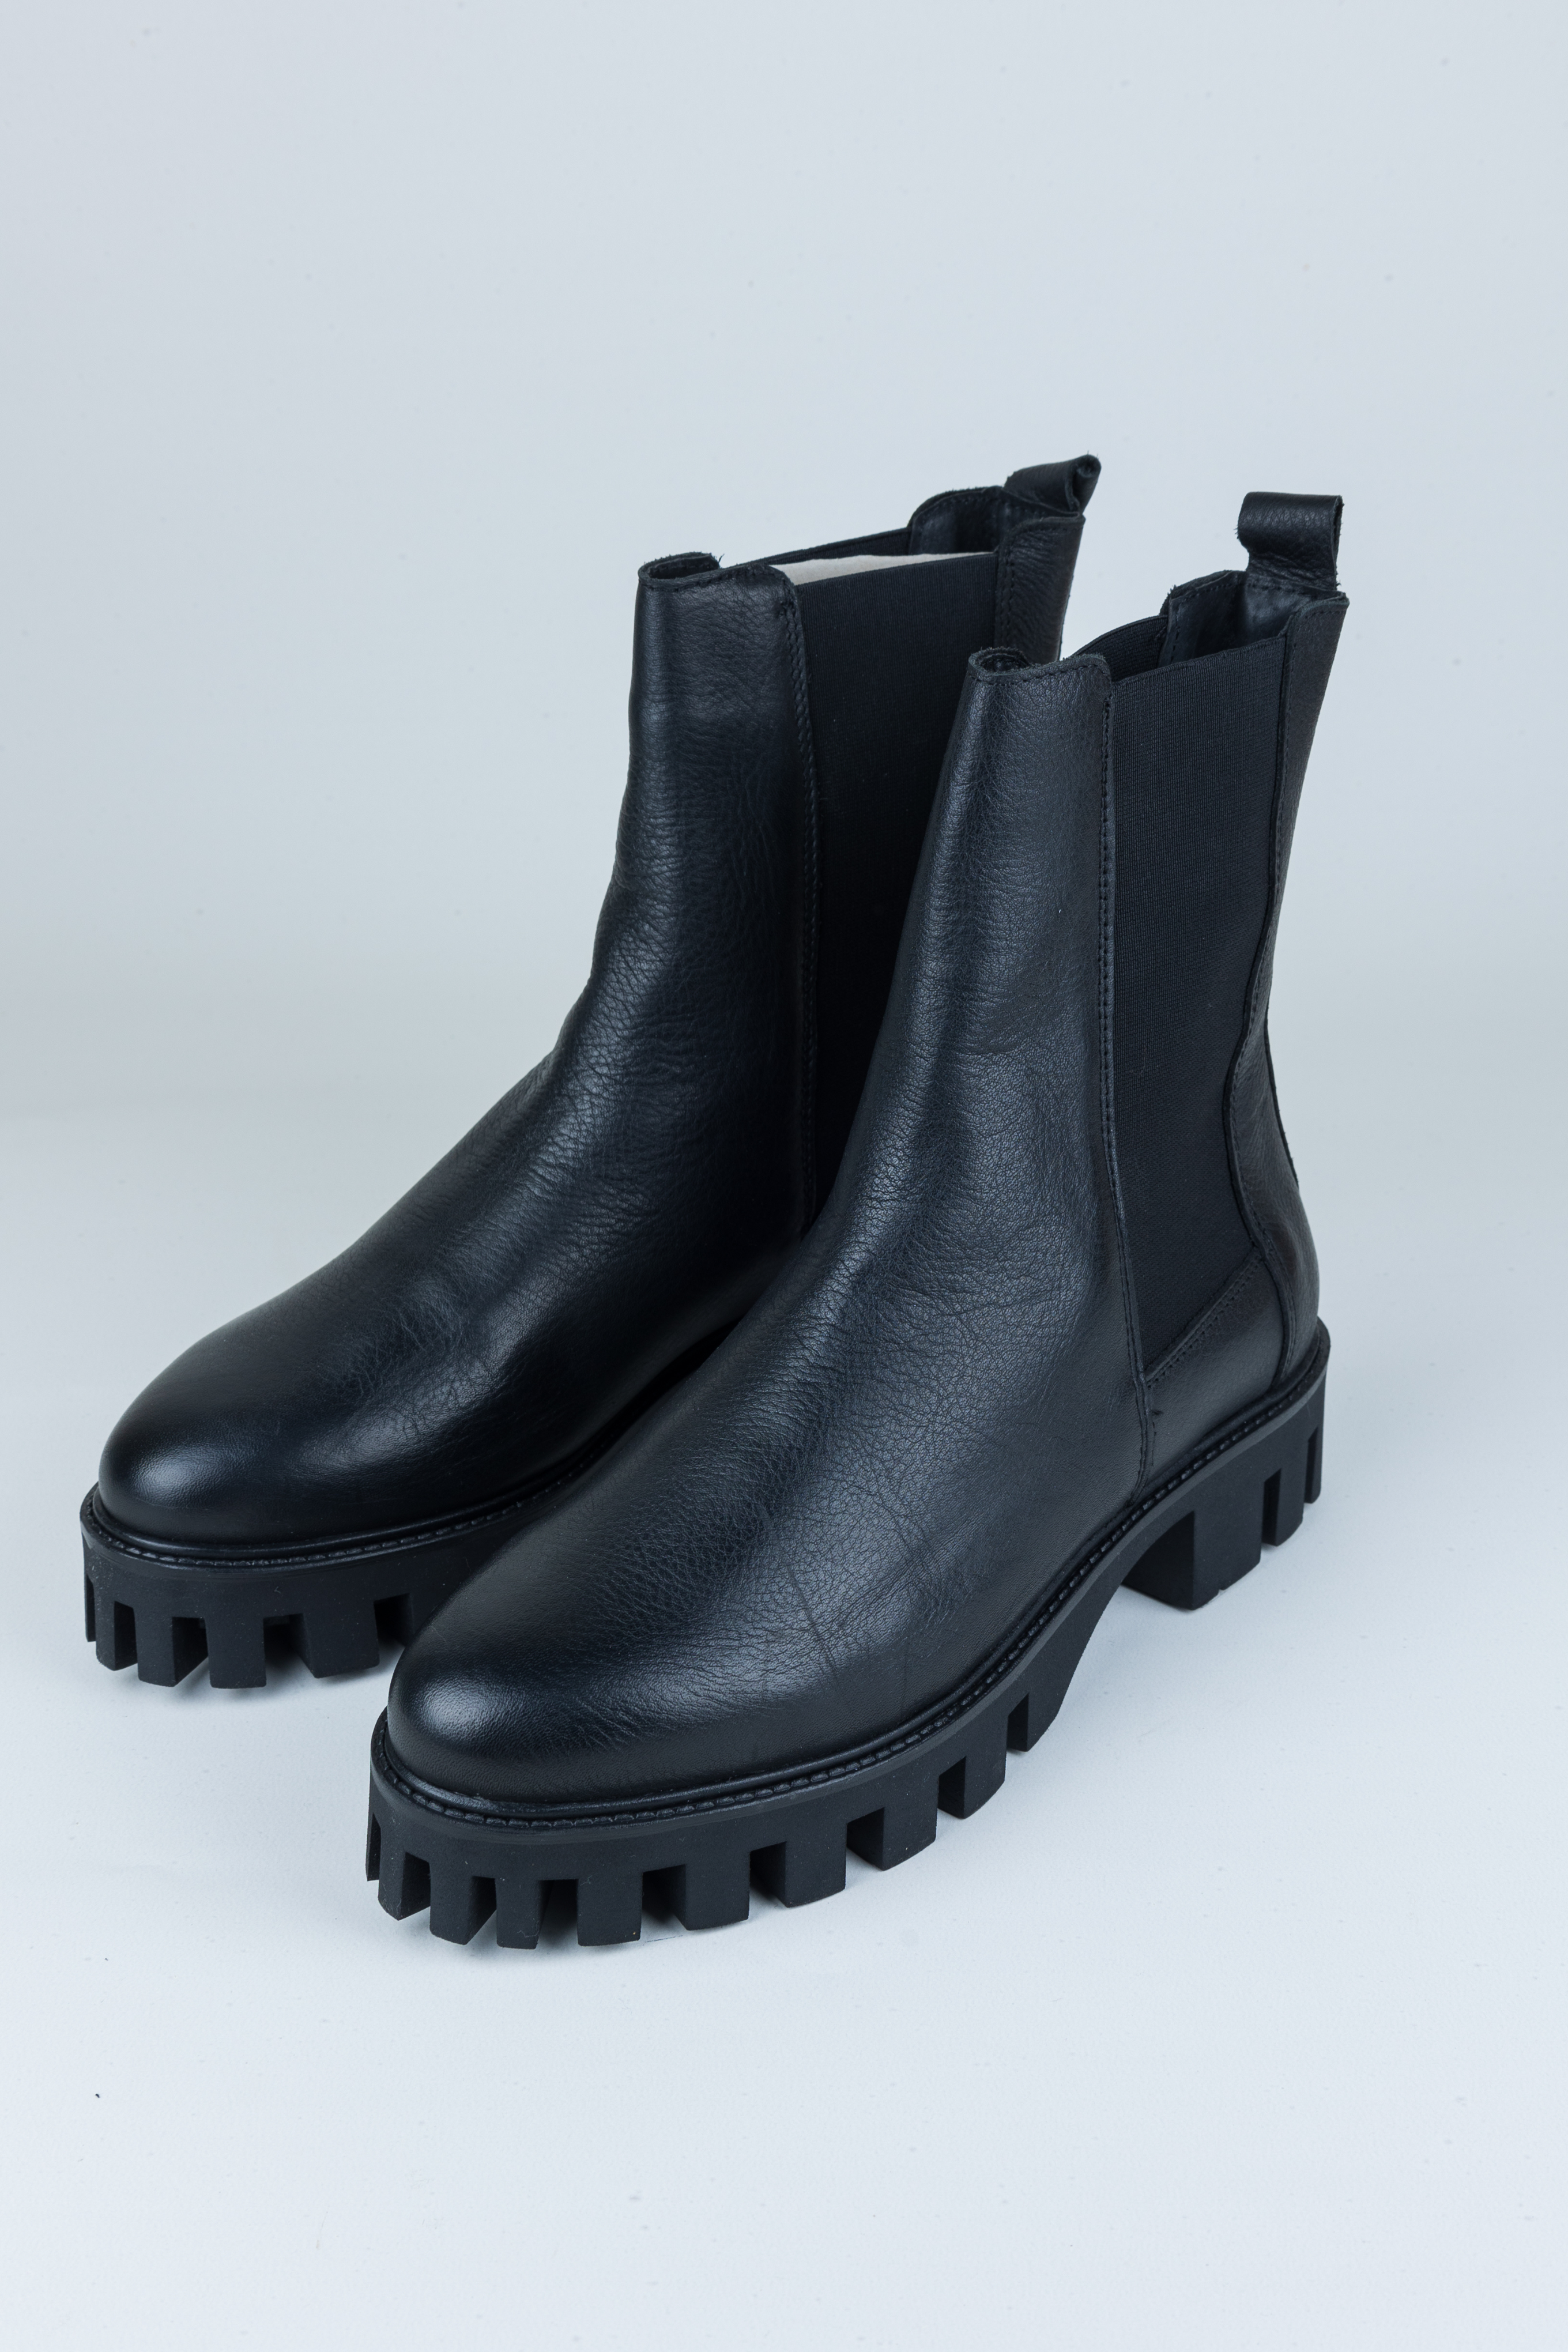 OU - BEE CARTEL 6-A BOOT - BLACK LEATHER